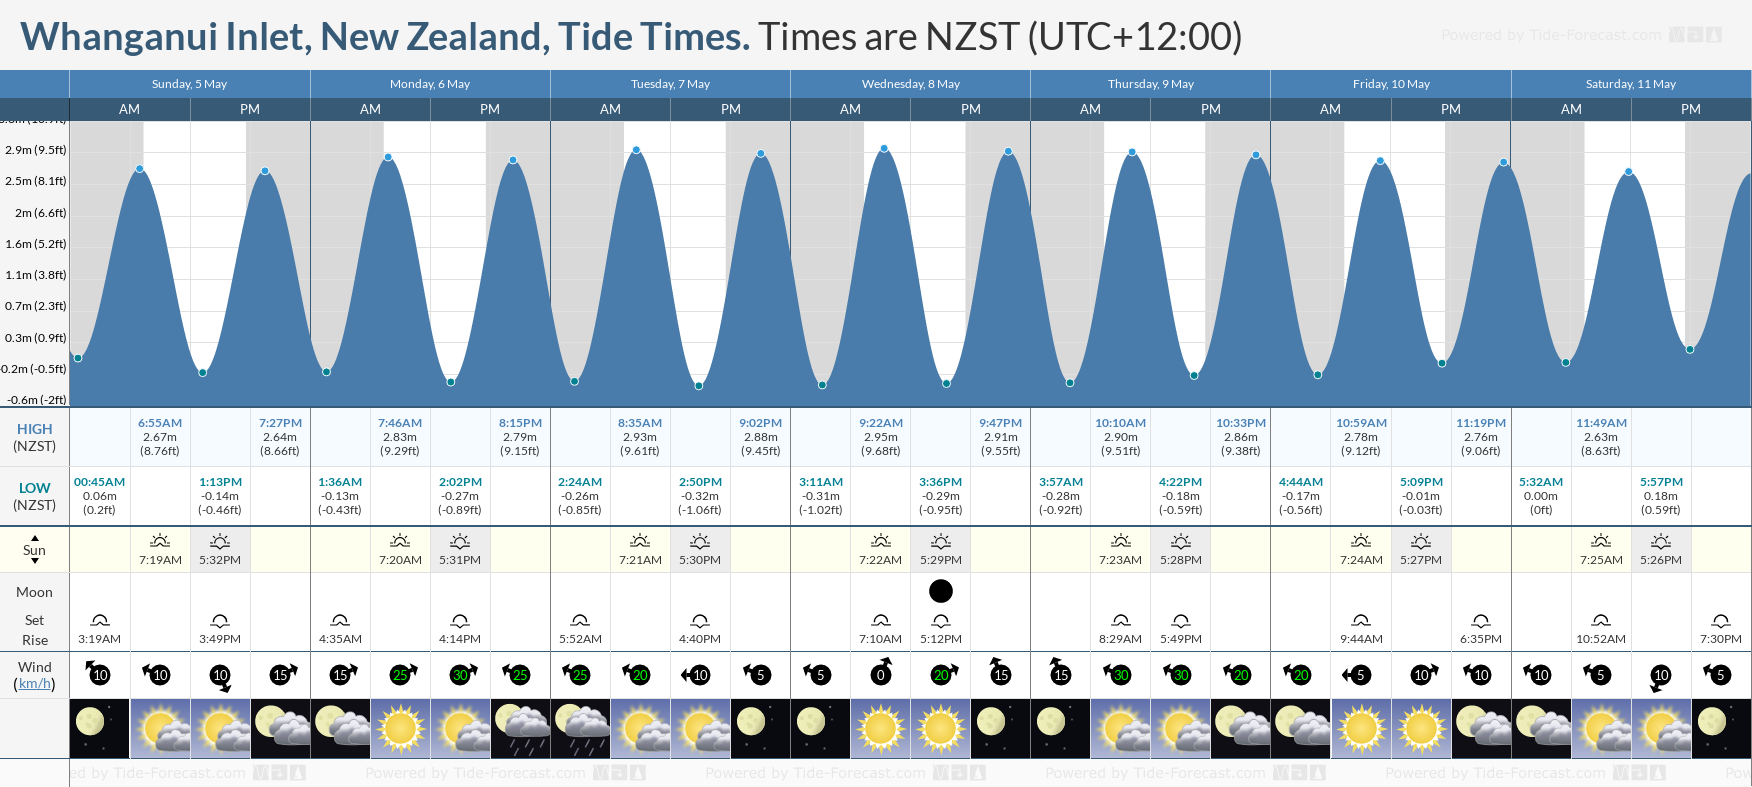 Whanganui Inlet, New Zealand Tide Chart including high and low tide times for the next 7 days